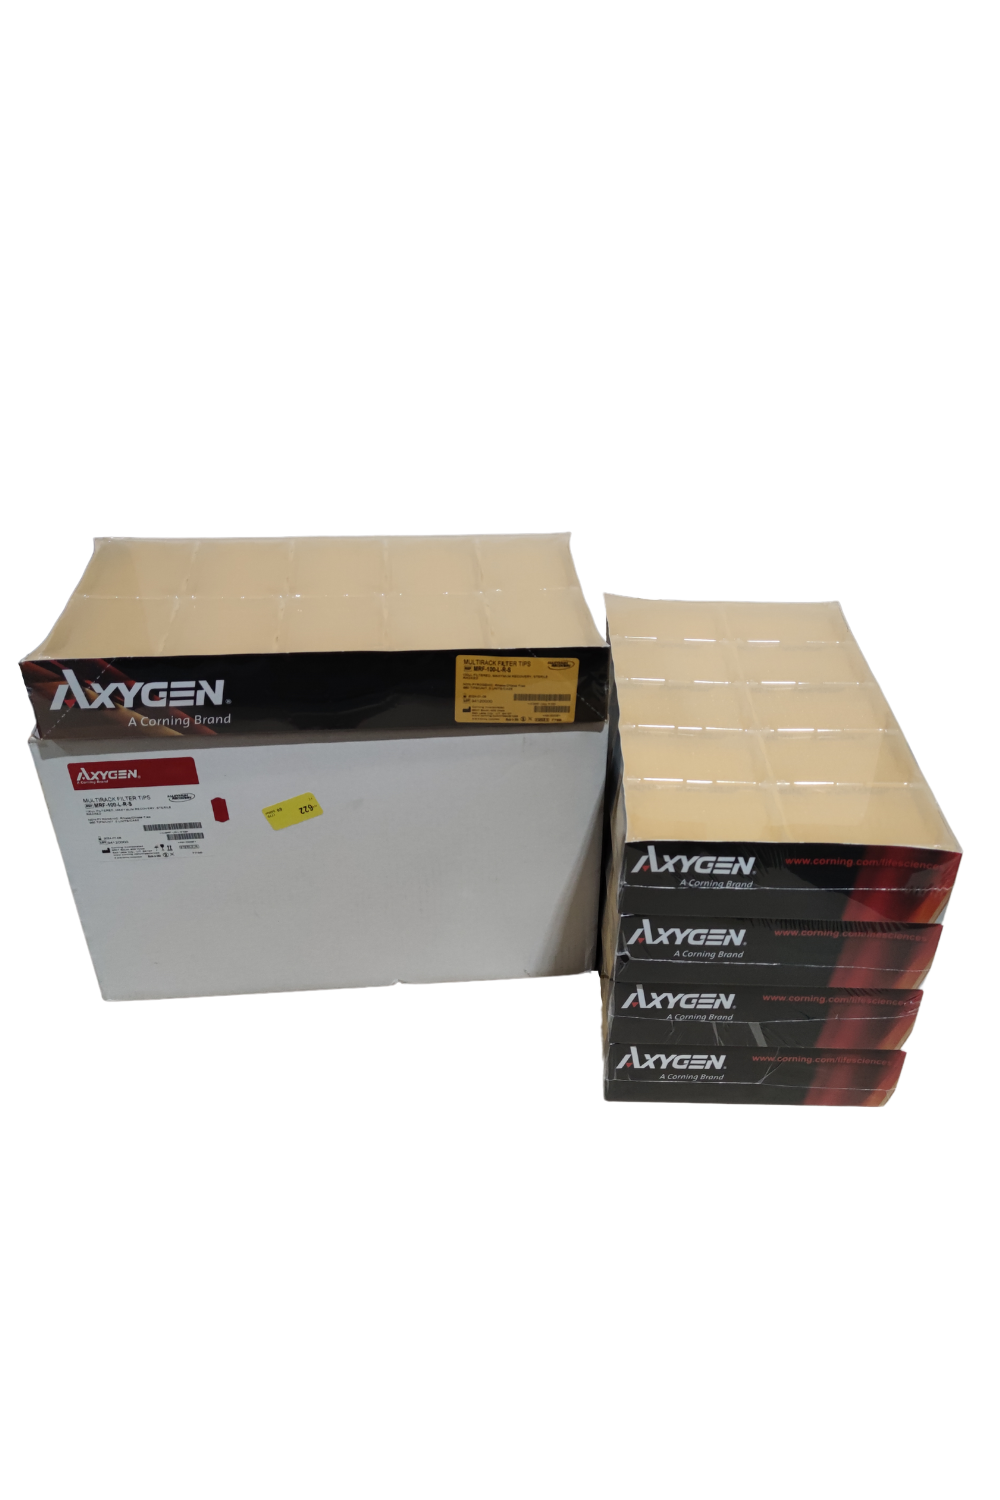 Axygen 100μl Maxymum Recovery Multirack Filter Tips (Overpack of 4800 tips) (MRF-100-L-R-S) (16392237)